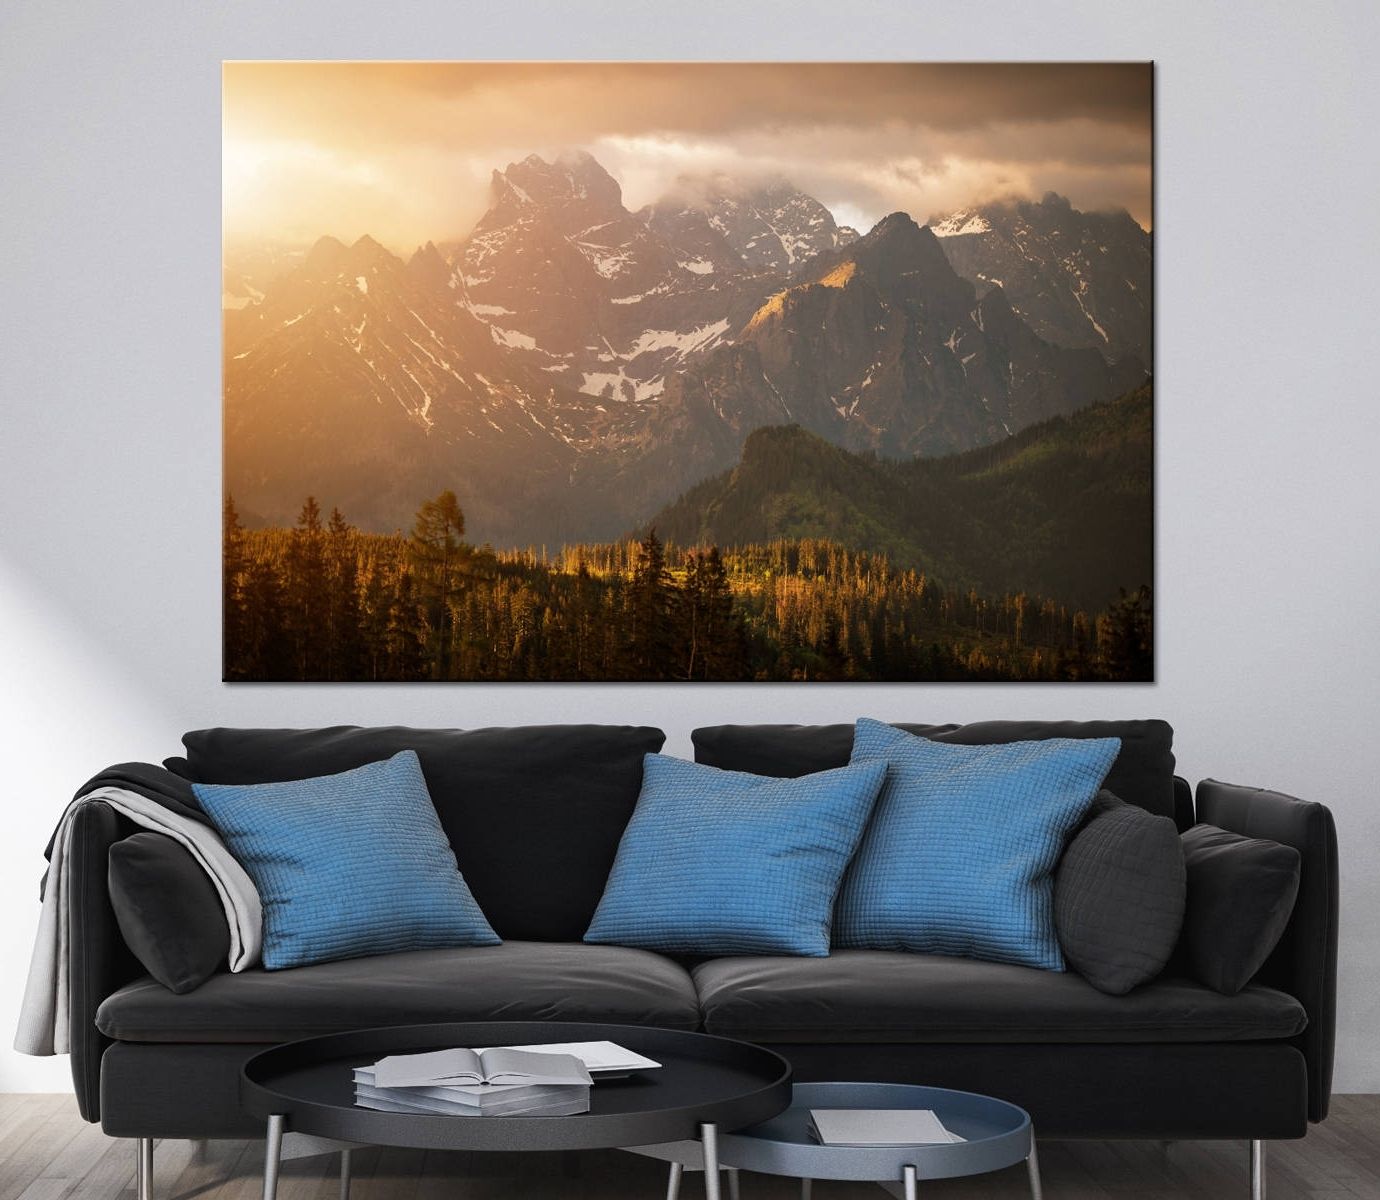 Mountains Sunset Scenery Photoprint Multi Panel Canvas Print Wild For Most Current Extra Large Wall Art Prints 